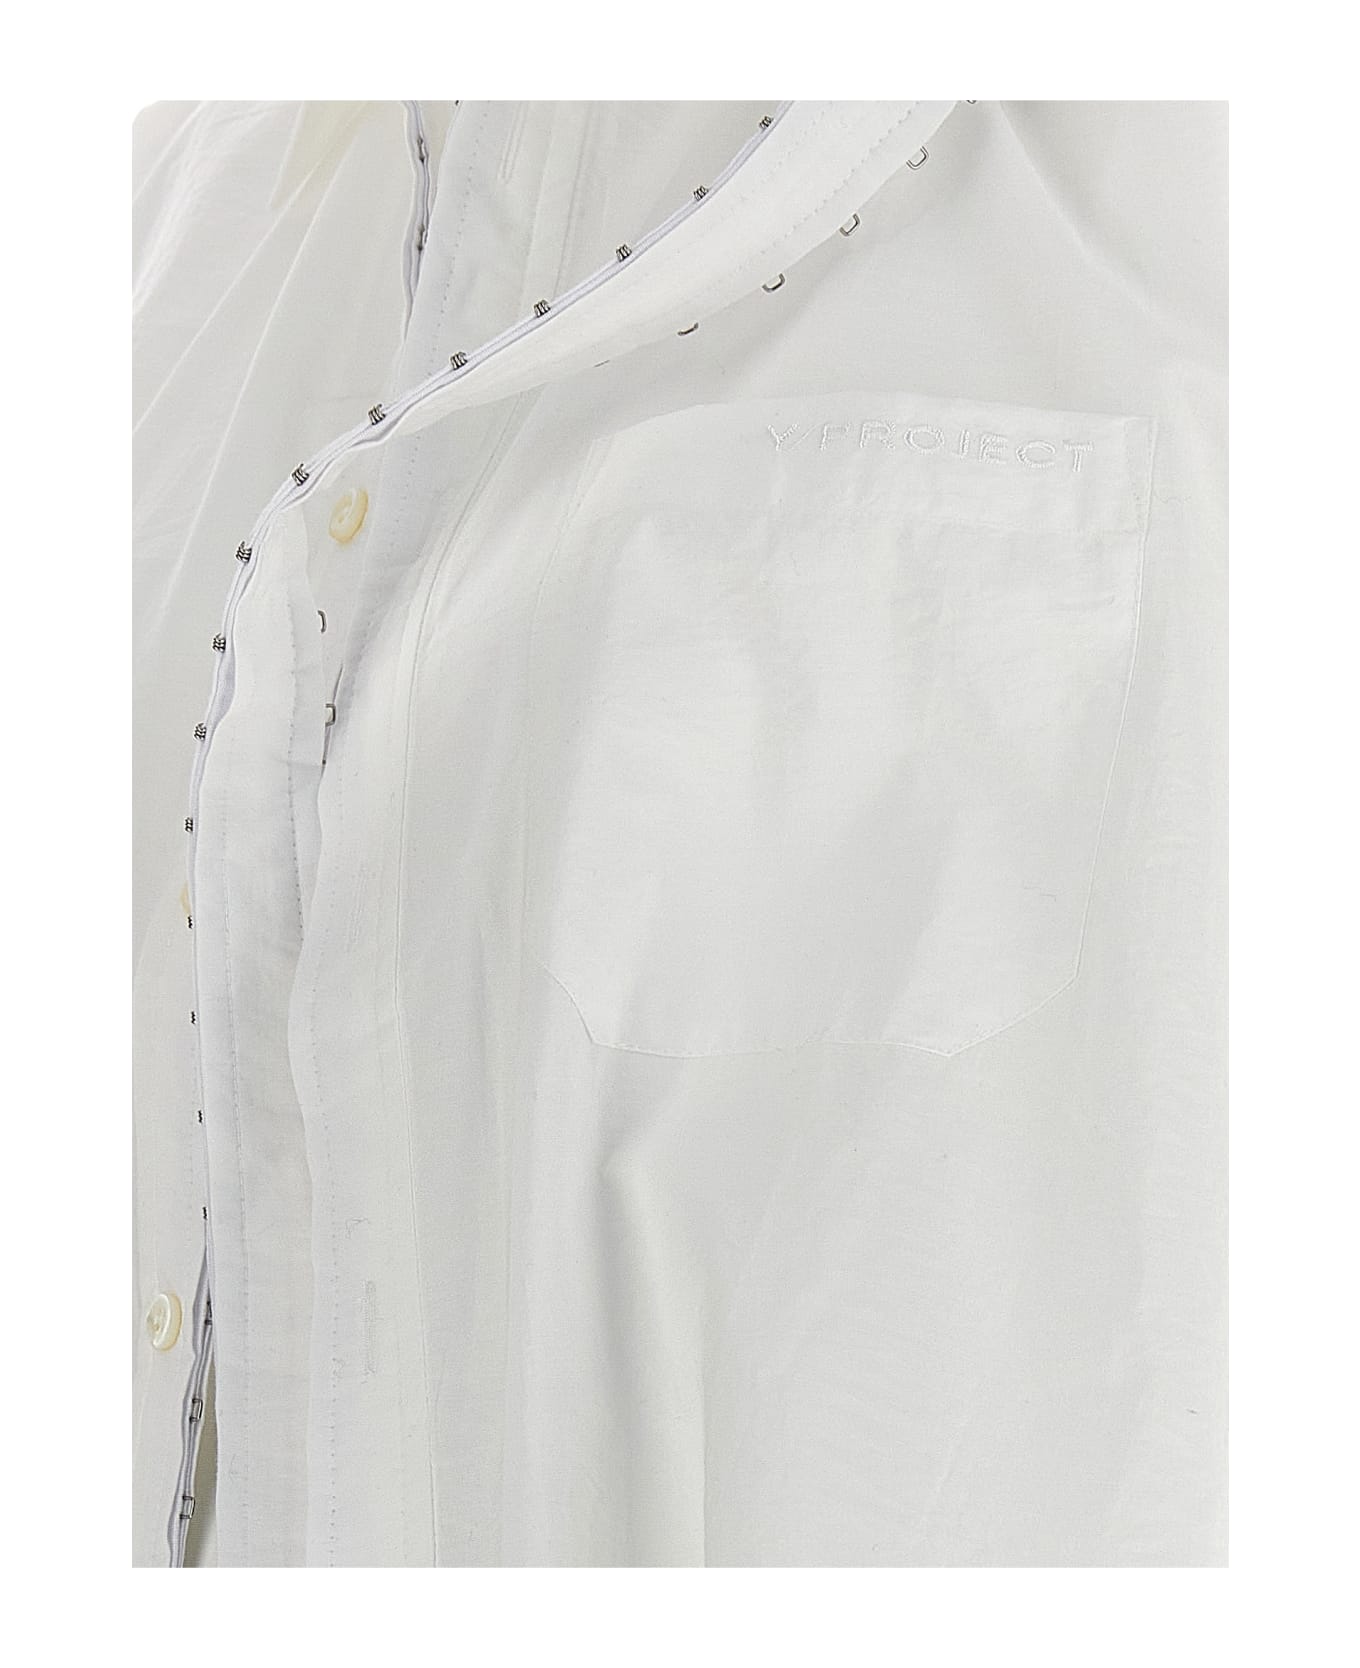 Y/Project 'hook And Eye' Shirt - White